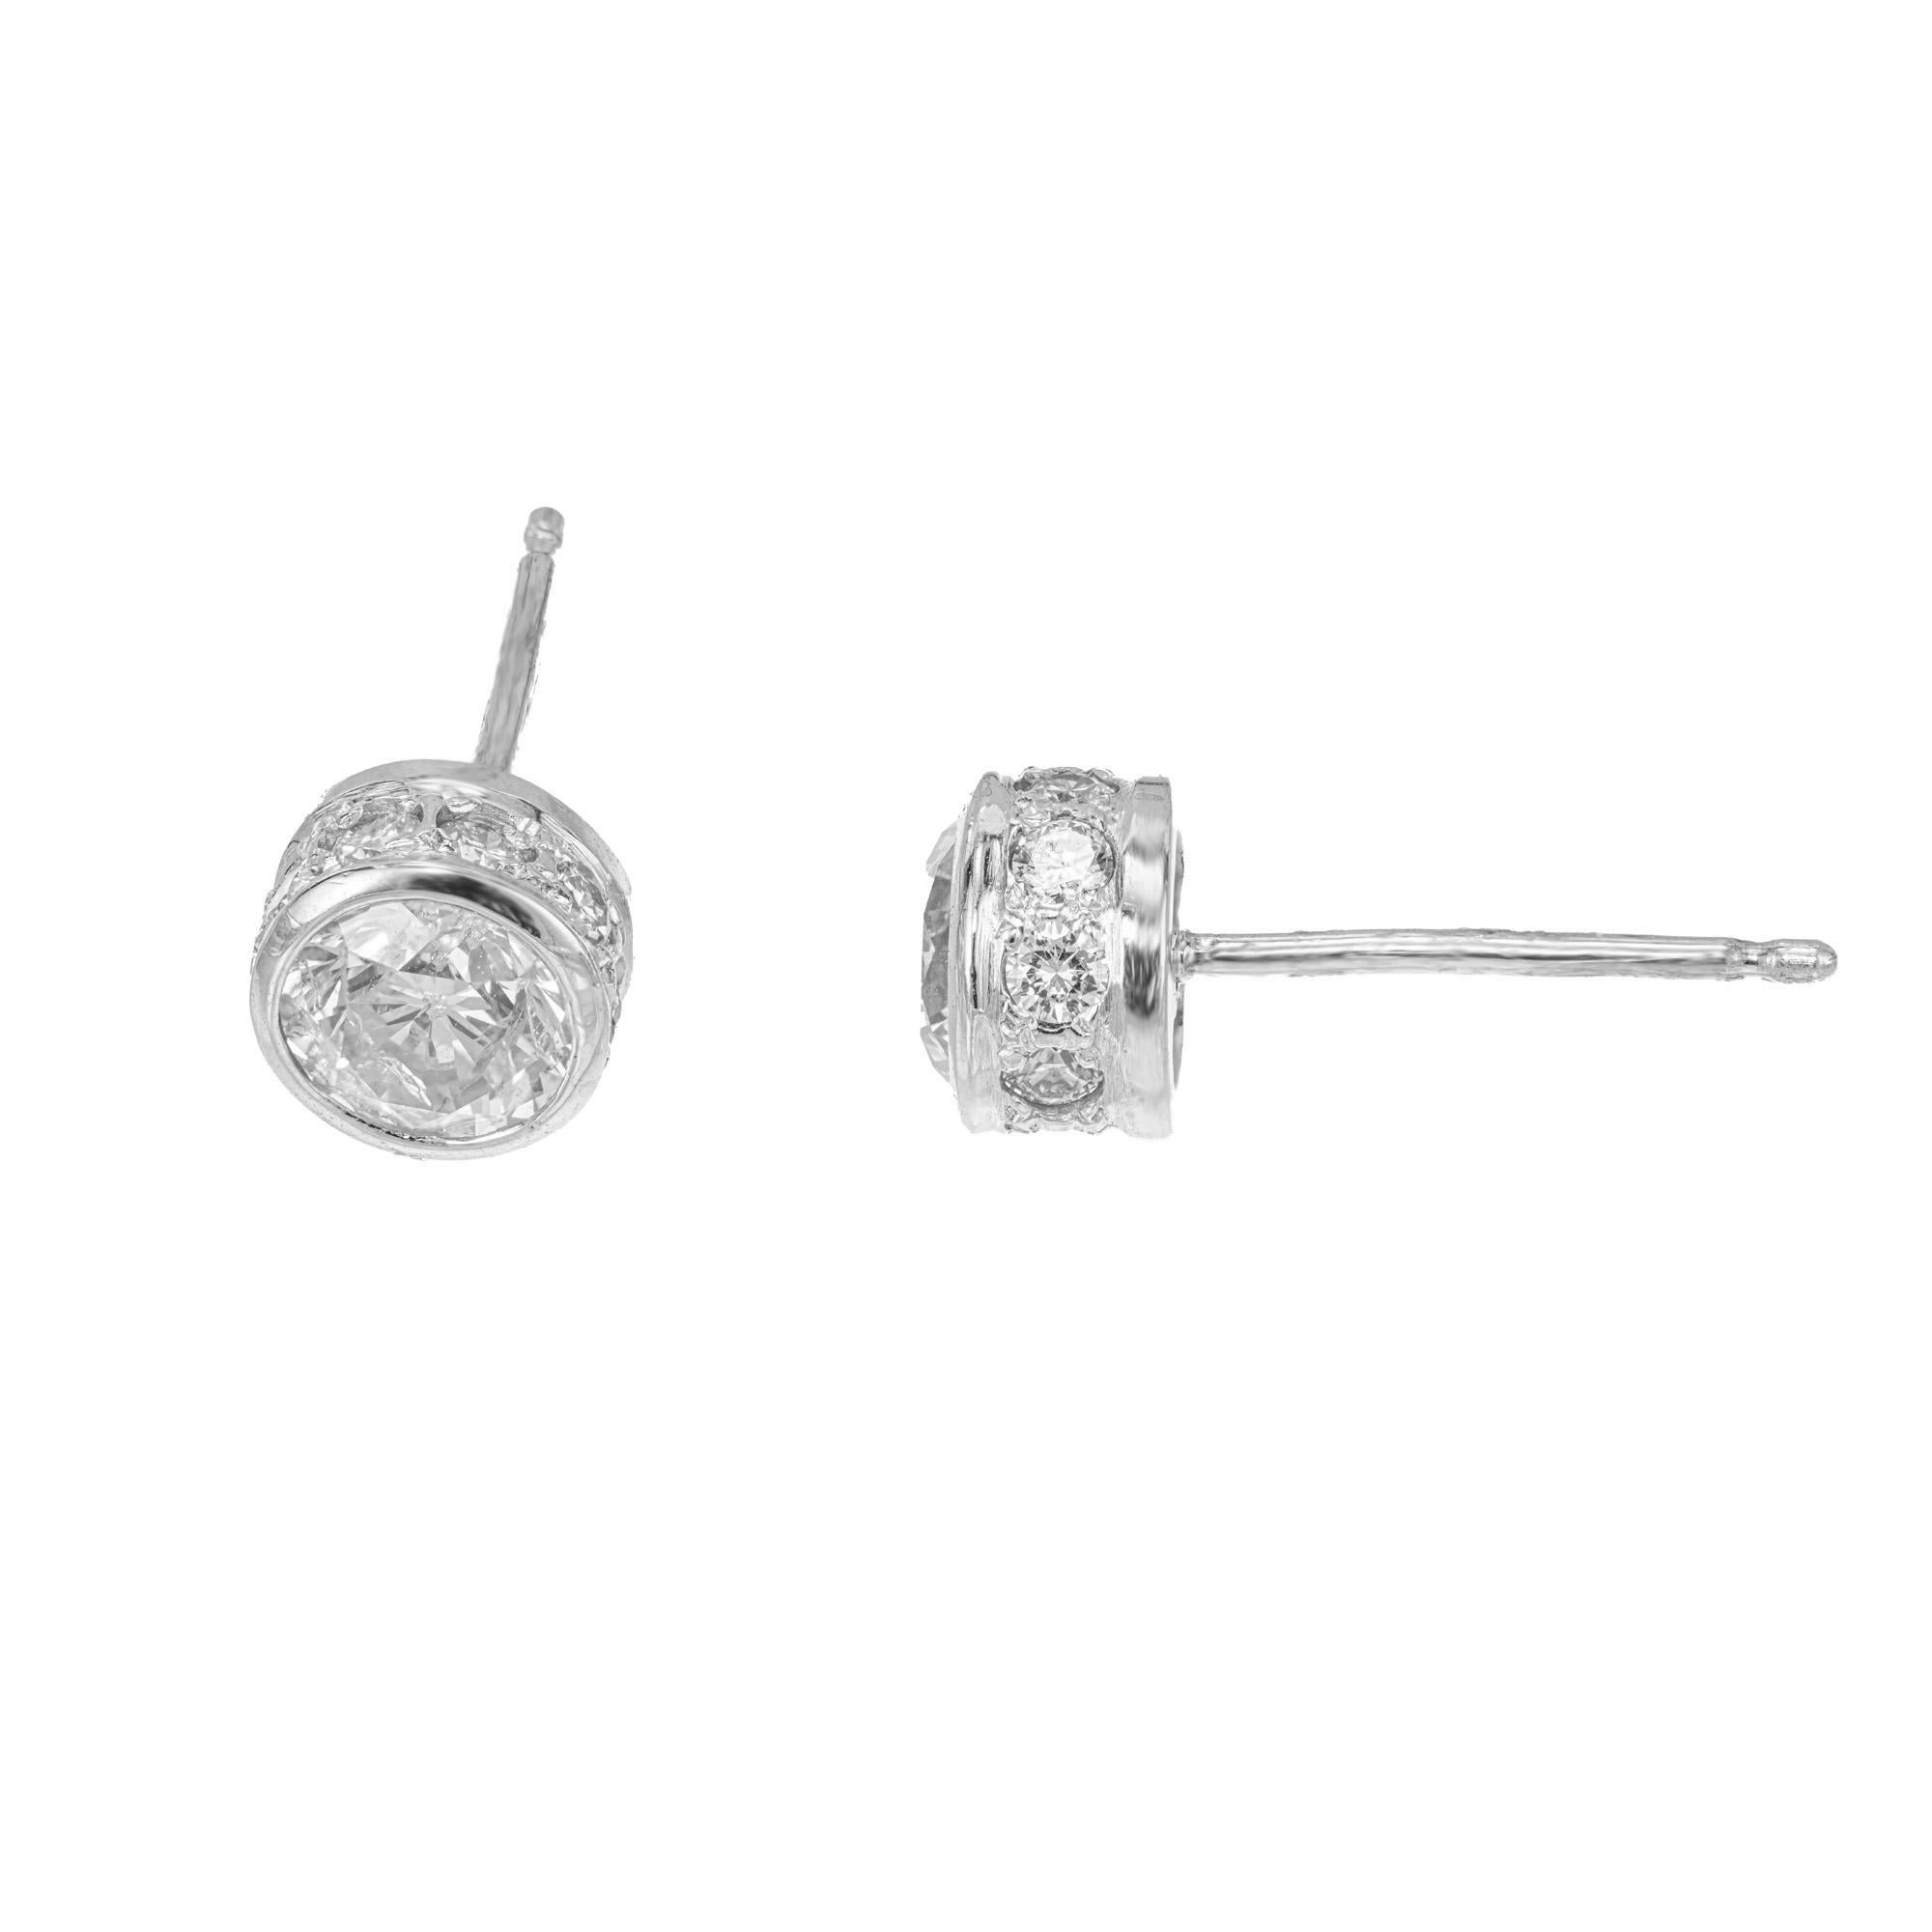 1.36 Carat Diamond Platinum Bezel Set Stud Earrings In Good Condition For Sale In Stamford, CT